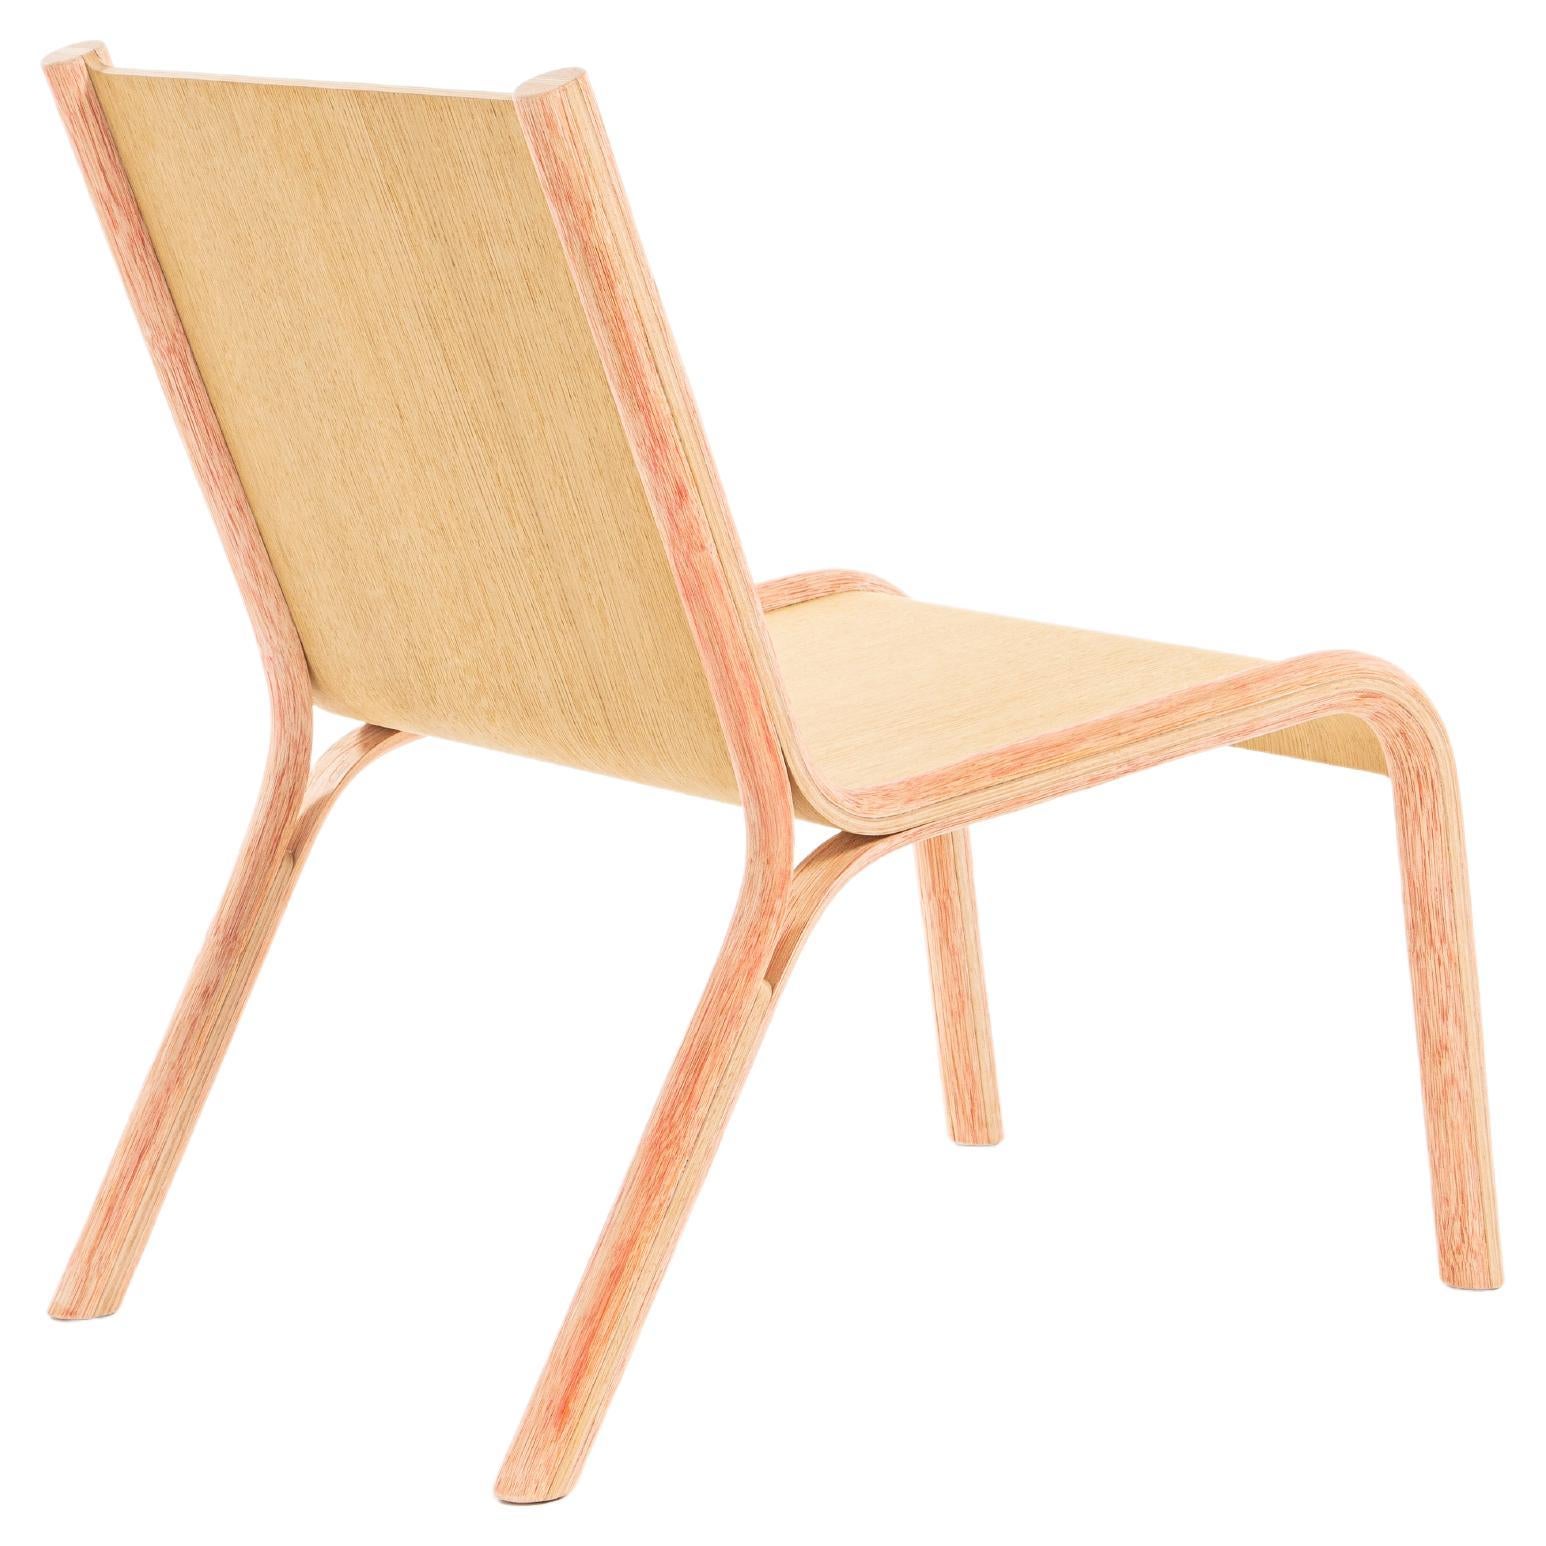 Josian chair, debarked and curved rattan and oak by 13 Desserts